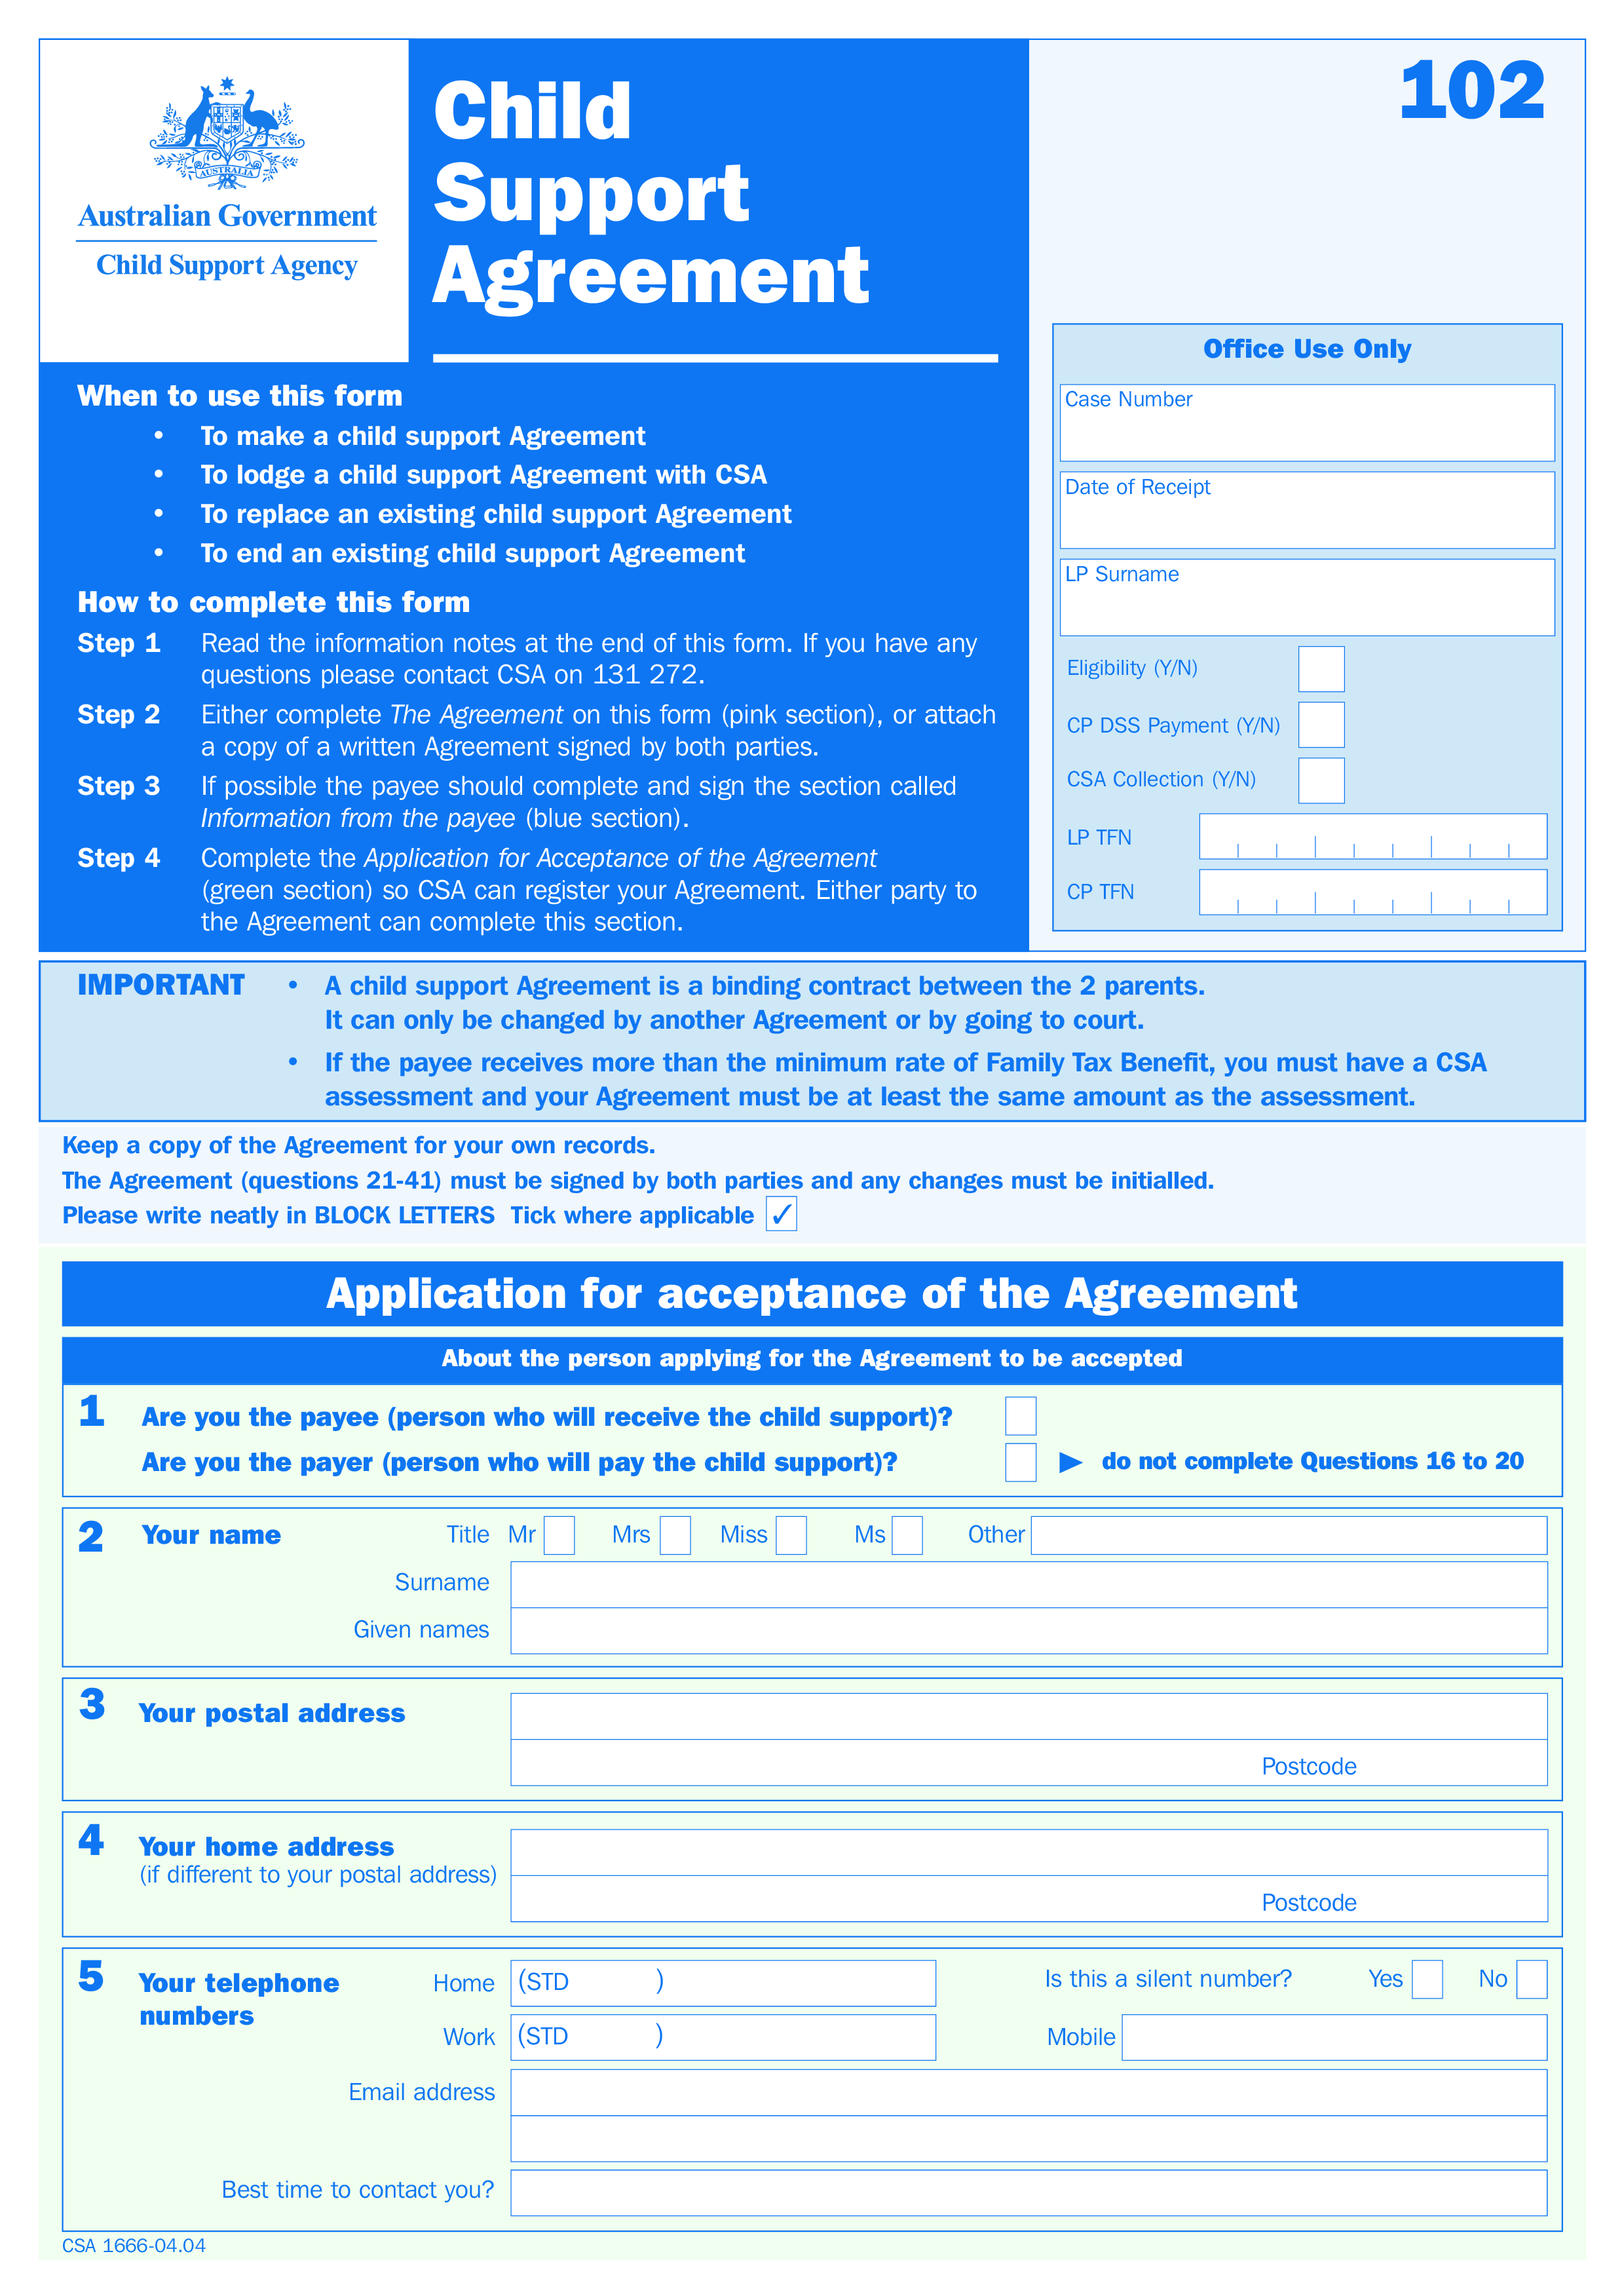 Legal Child Support Agreement main image